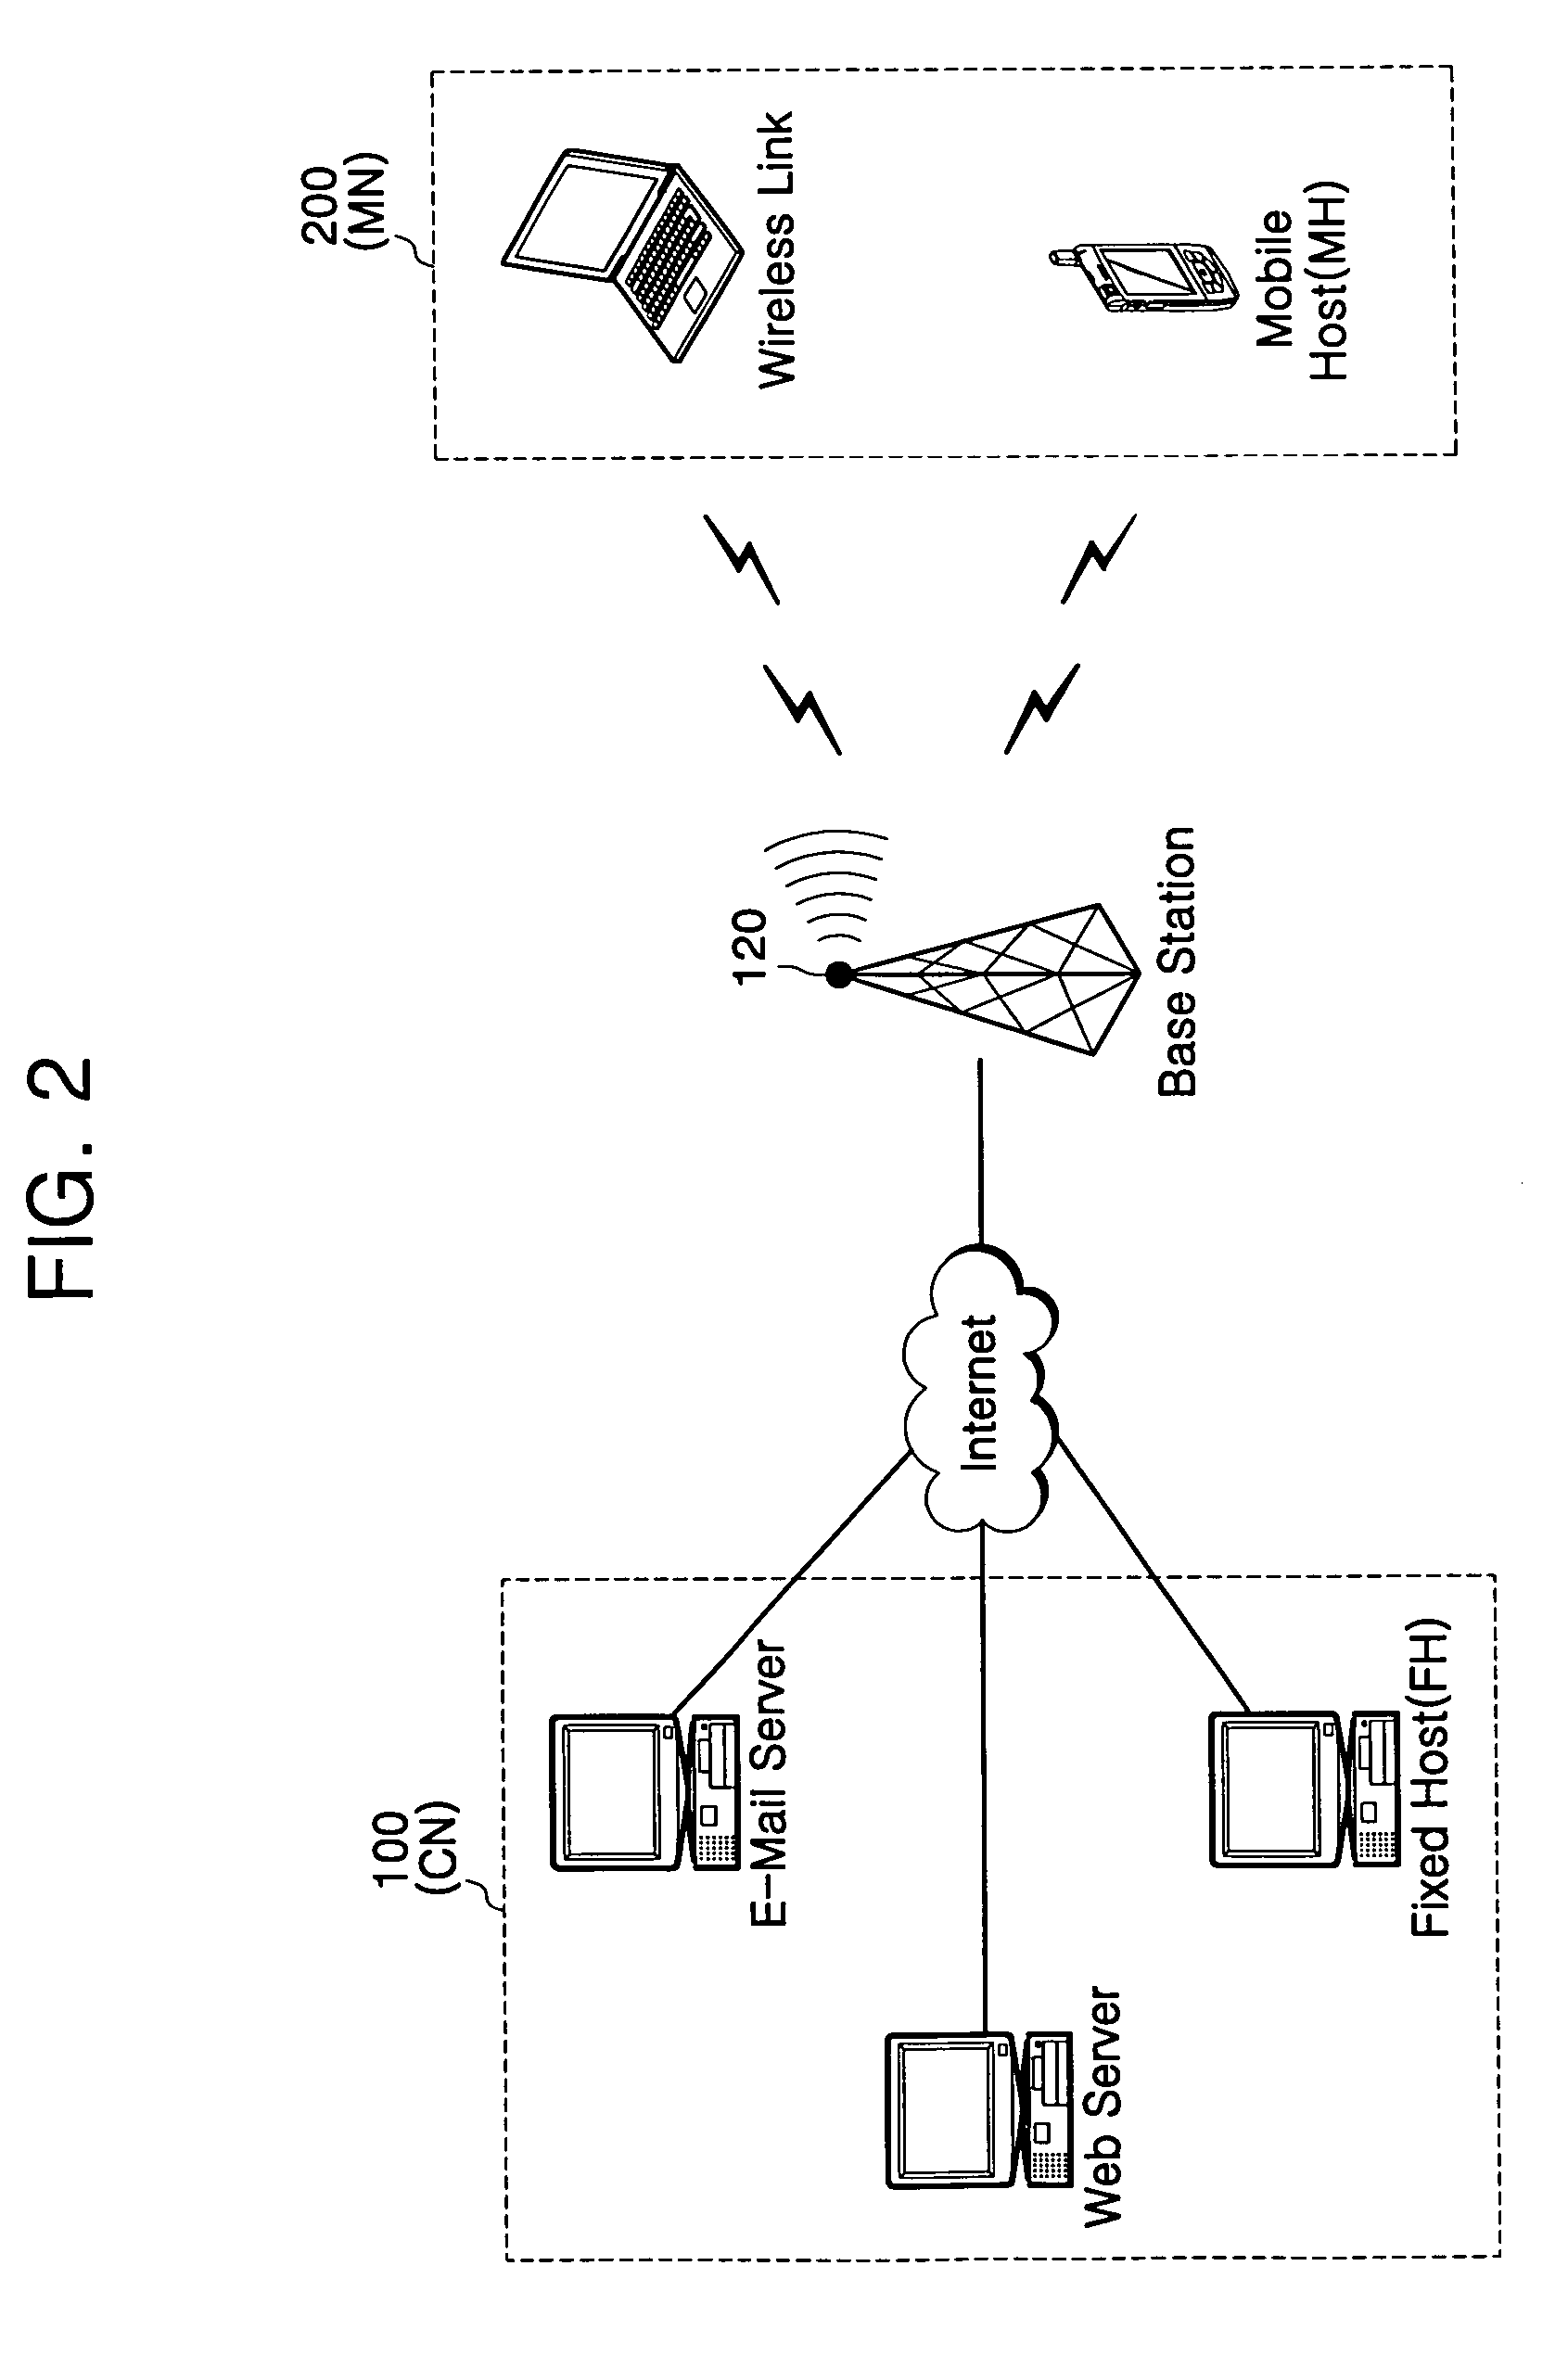 Transmission control protocol (TCP) congestion control using multiple TCP acknowledgments (ACKs)